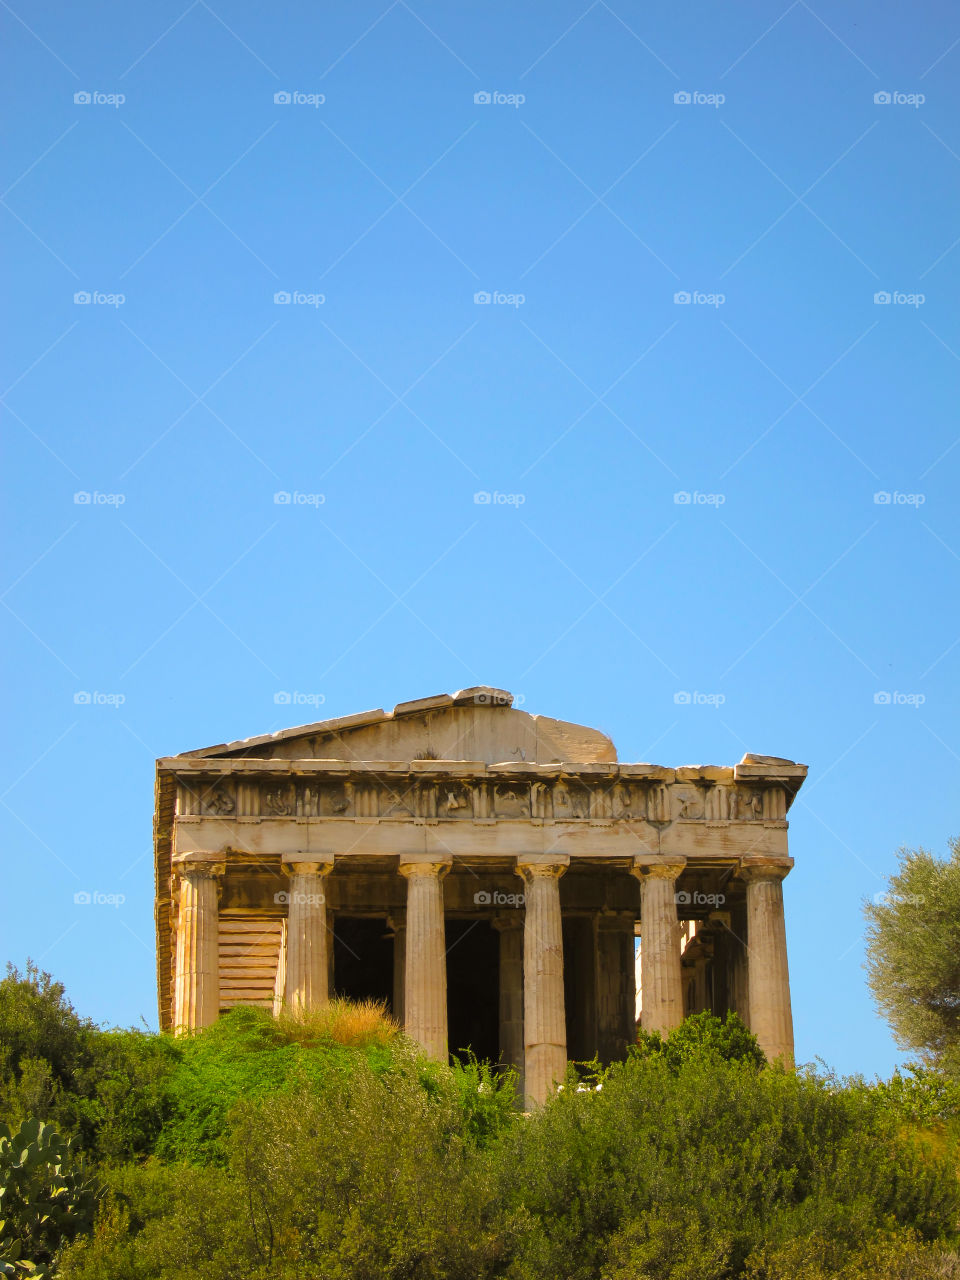 Ancient Greek temple ruins in Athens